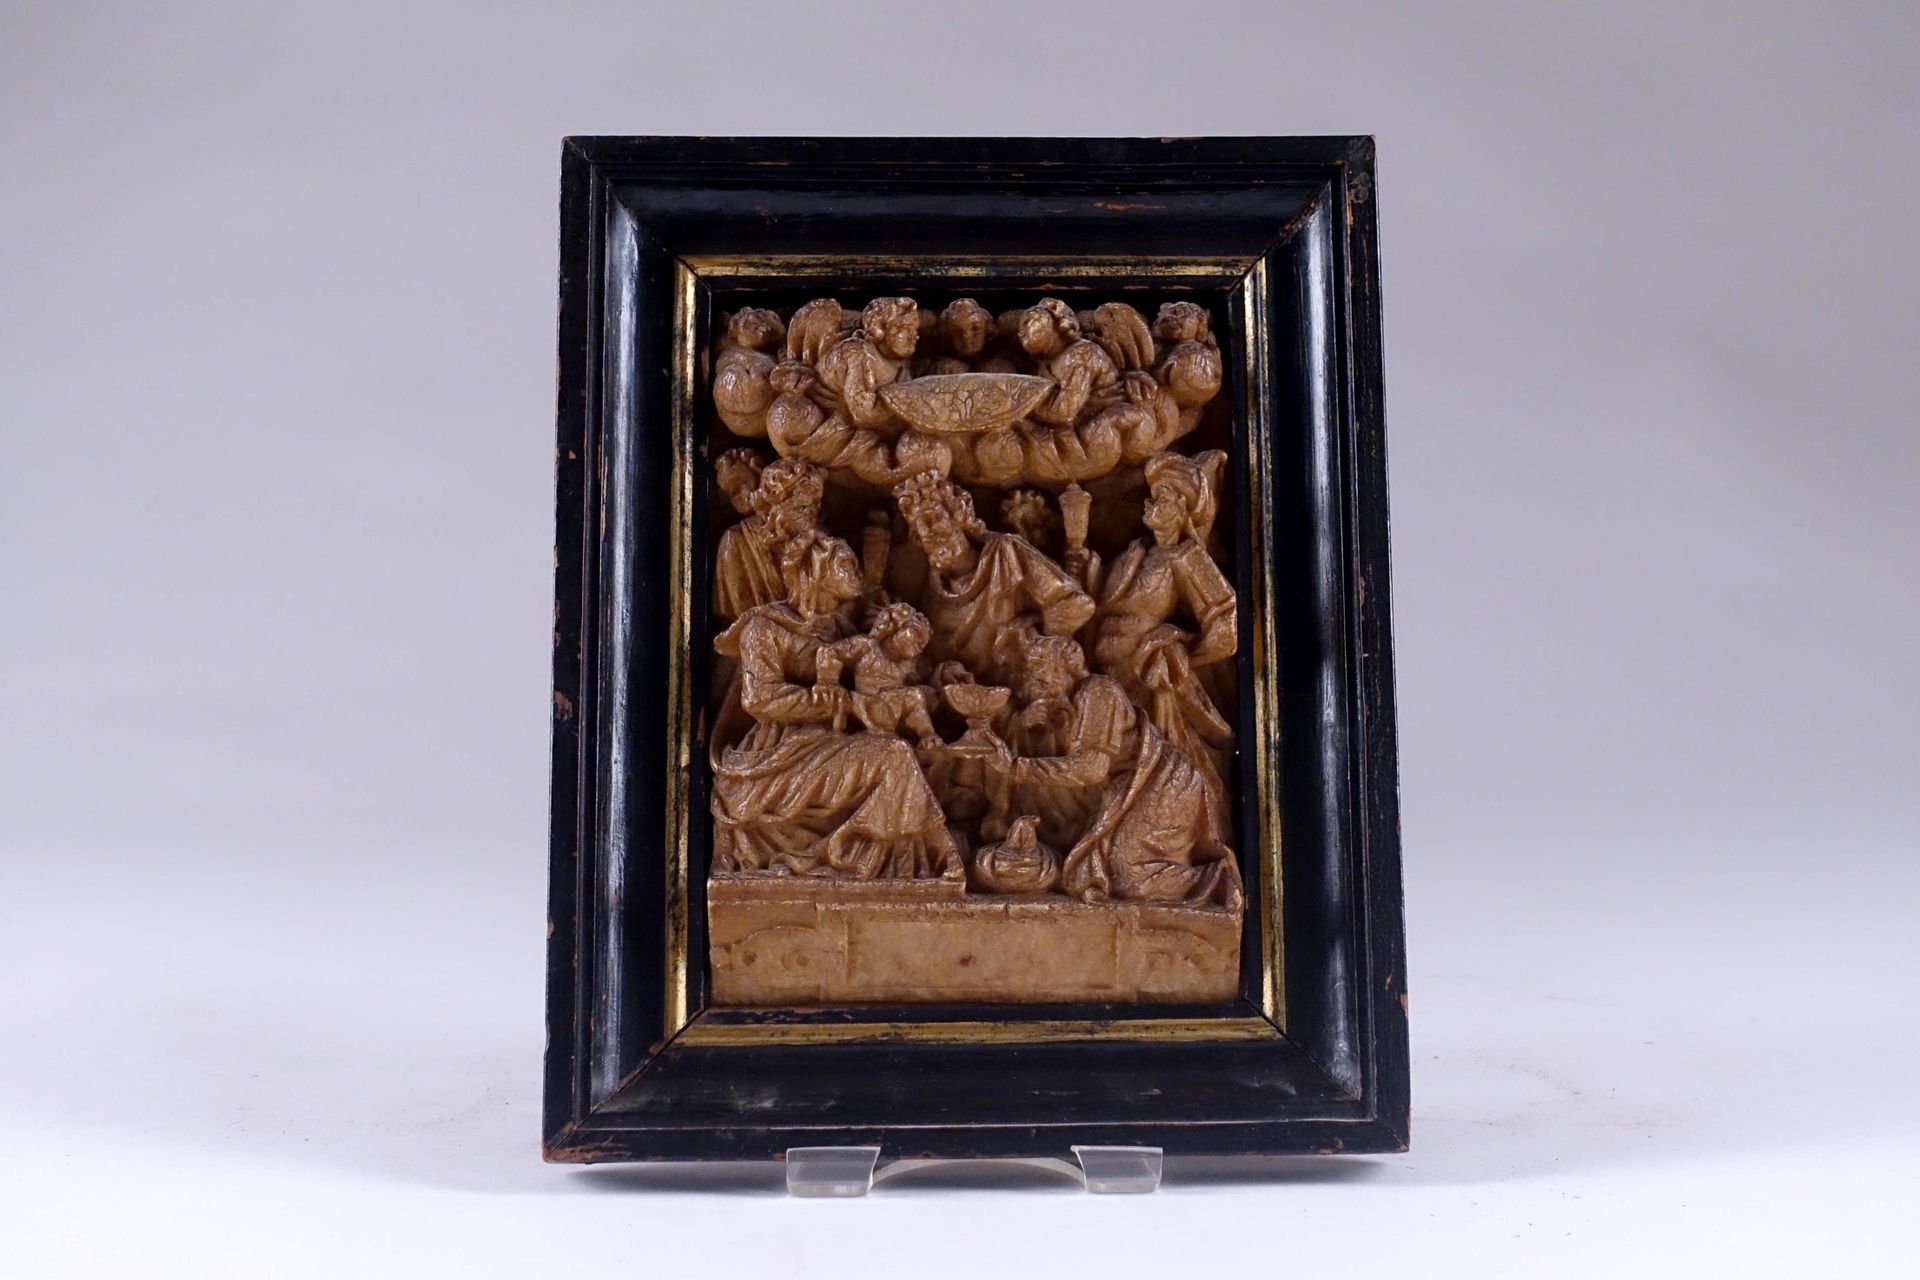 Malines, XVIIe siècle. The adoration of the Magi. Bas-relief in sculpted alabast&hellip;